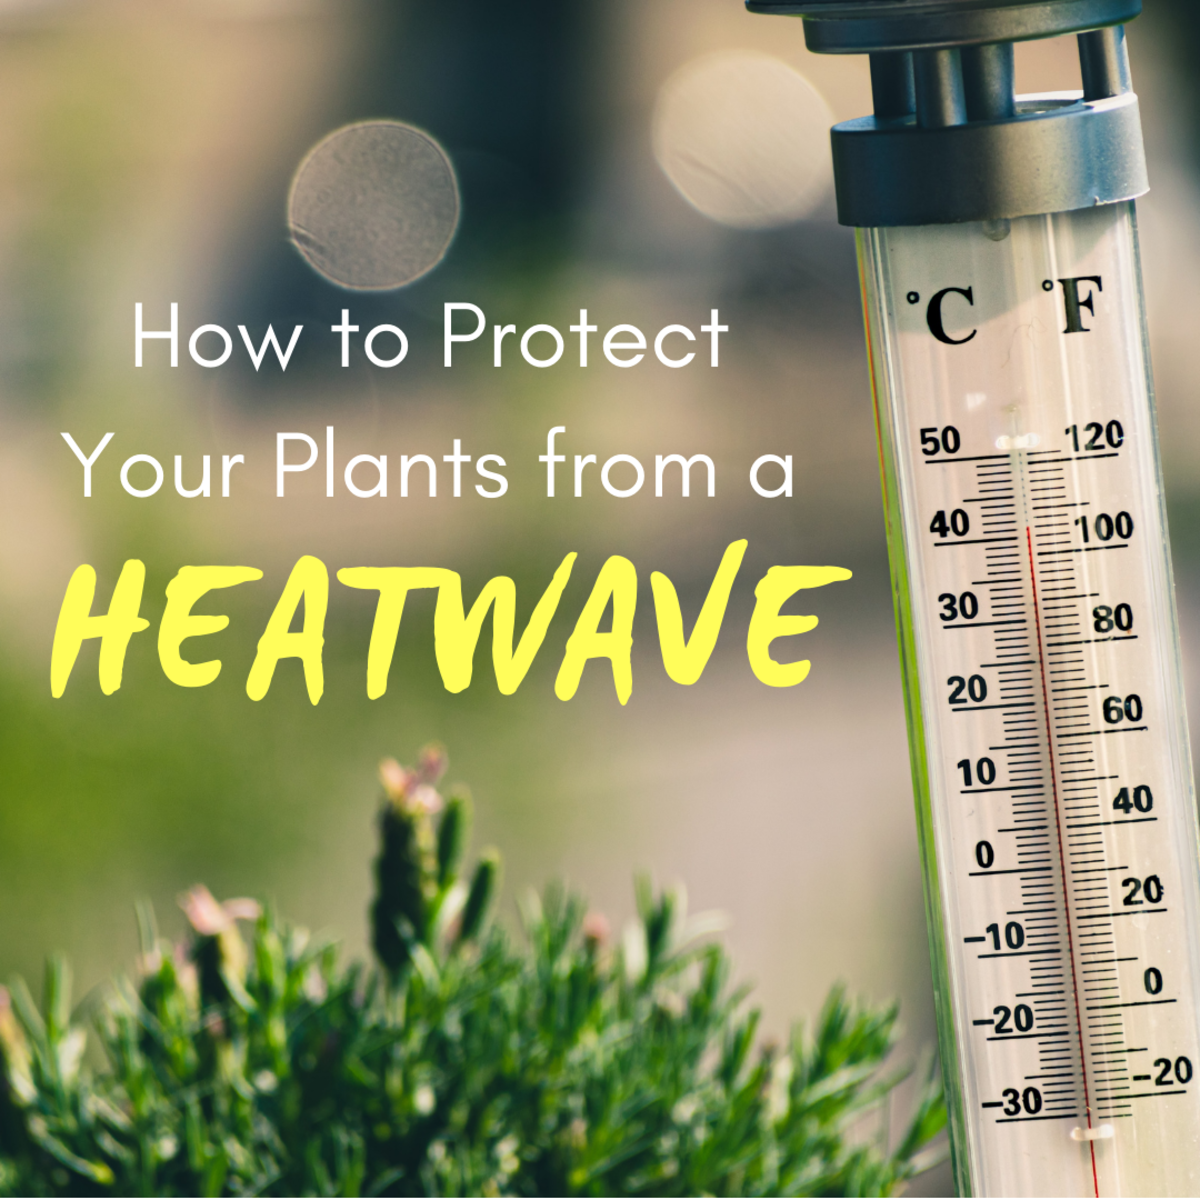 4 Simple Ways to Protect Your Garden During a Heatwave